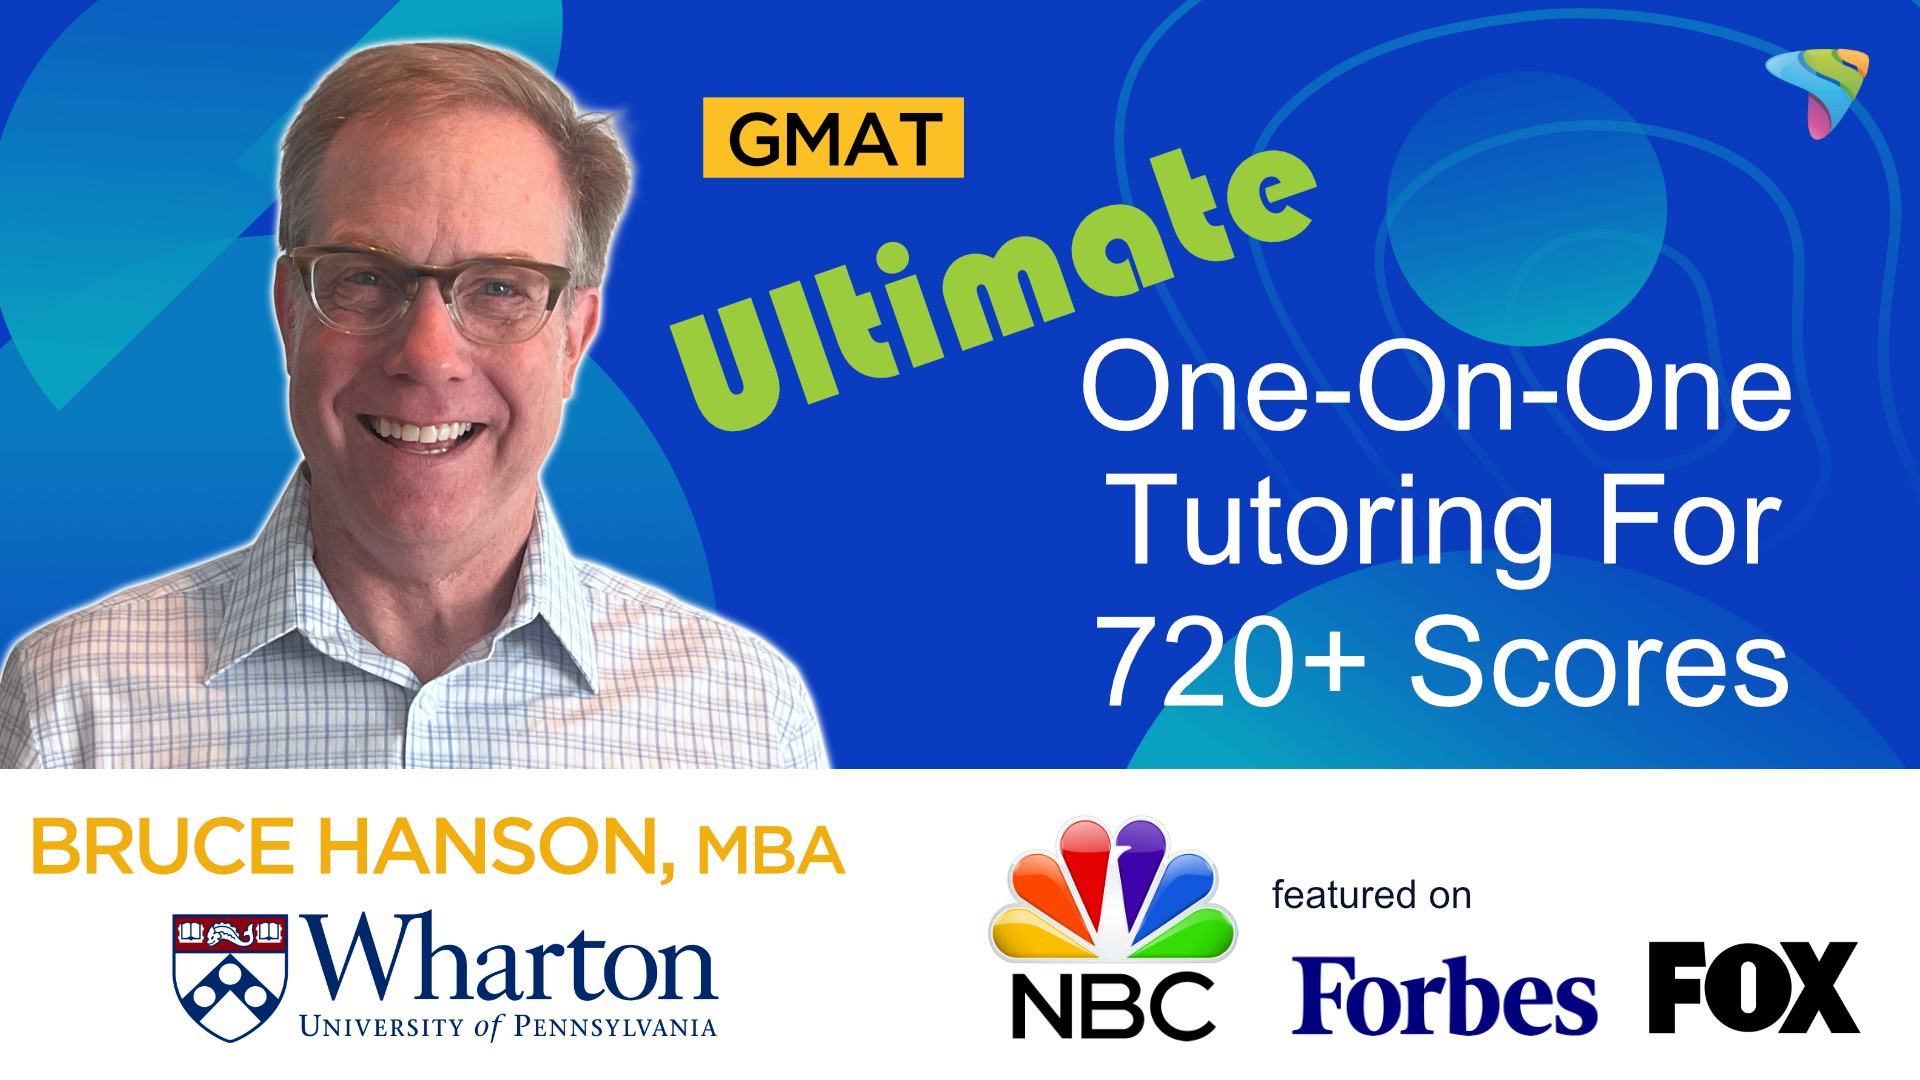 Ace the GMAT in 90 Days!   Advanced Tutoring for 720+ Scores! (20% off!)